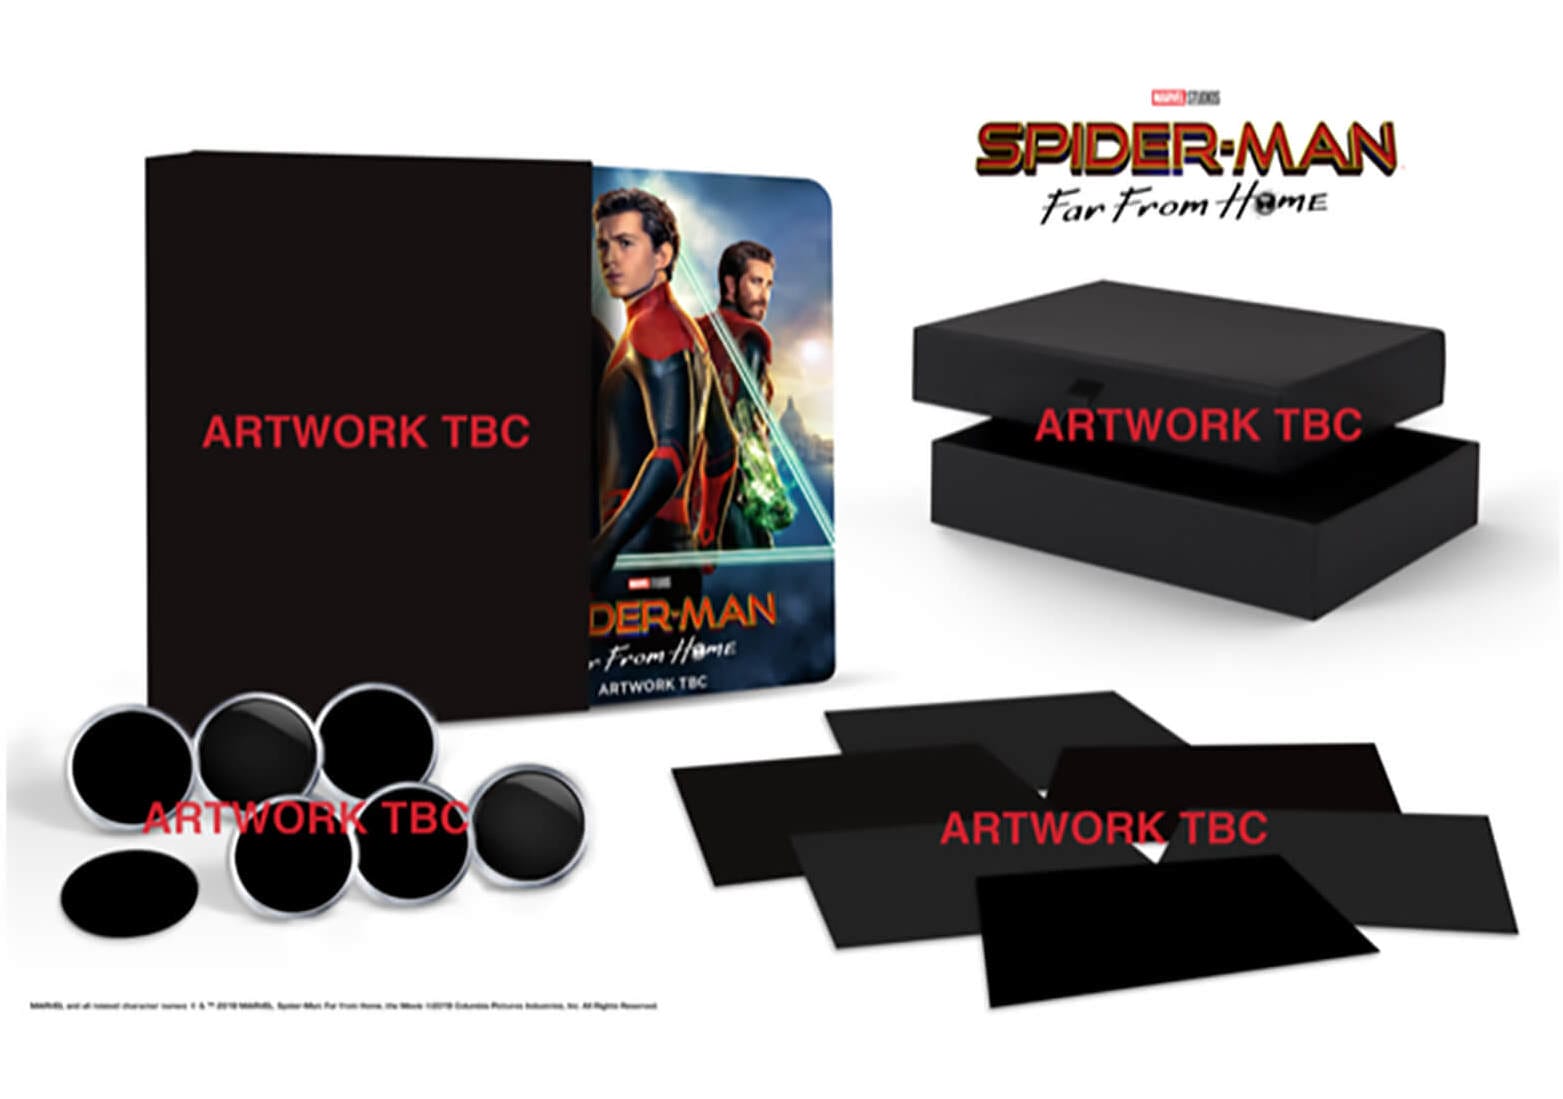 Spider-man: Far from Home 4K Ultra HD Collector's Edition Steelbook